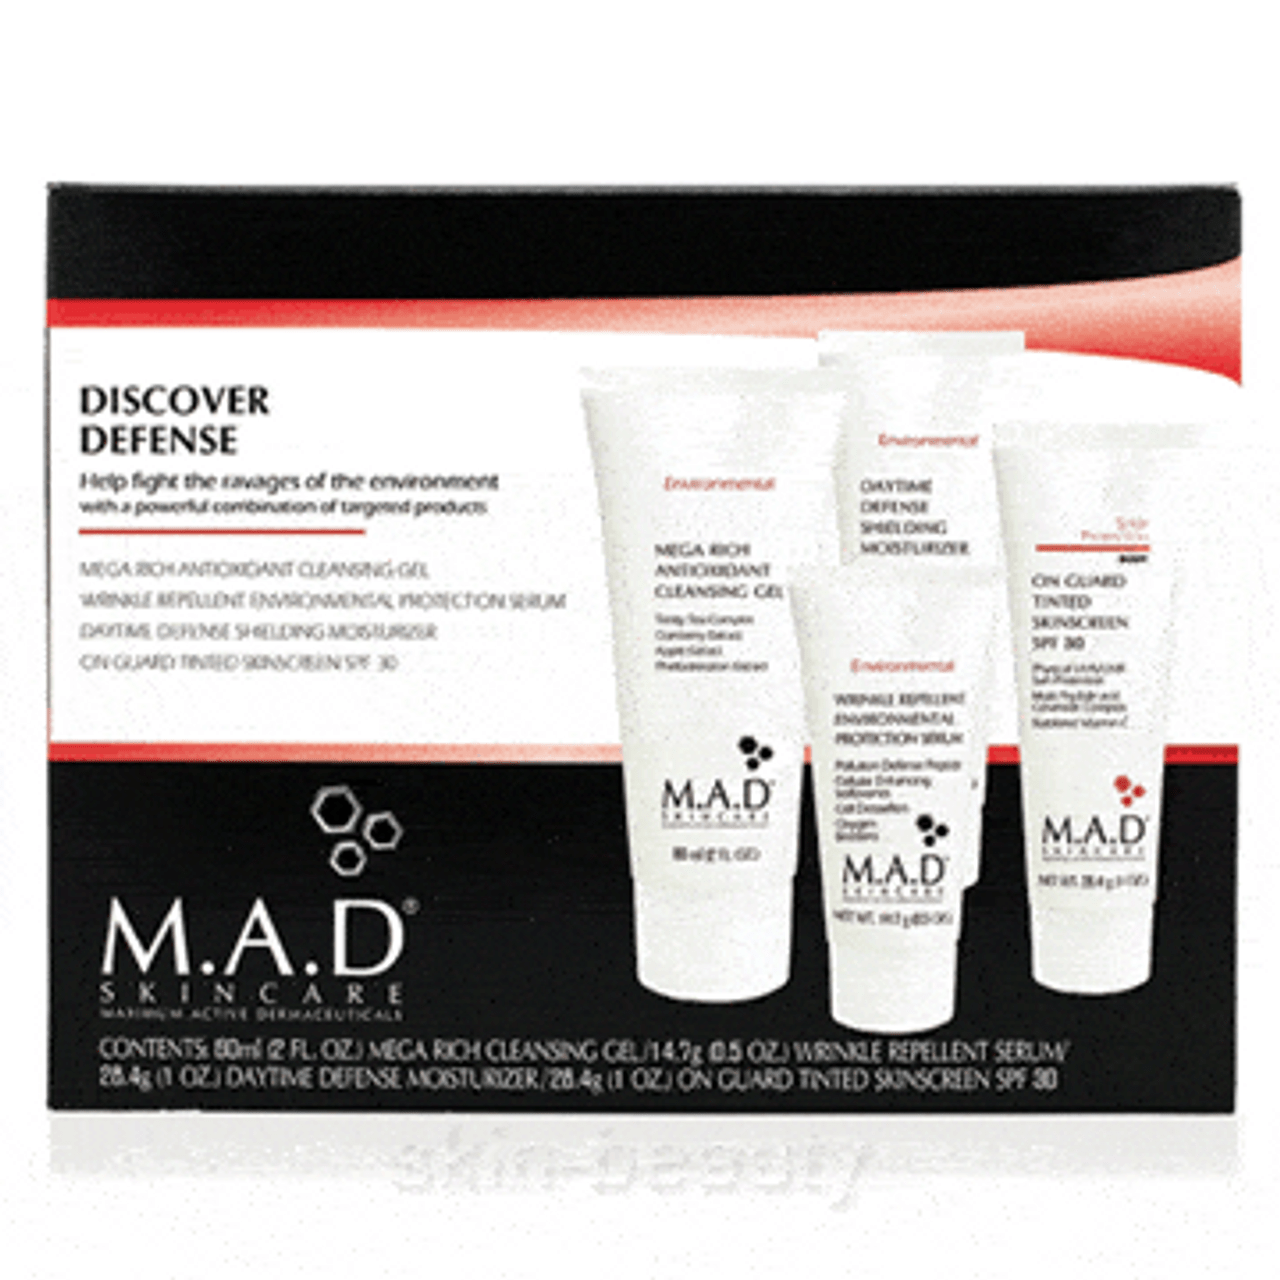 m a d skincare, Revolutionizing Skincare with Innovation and Results